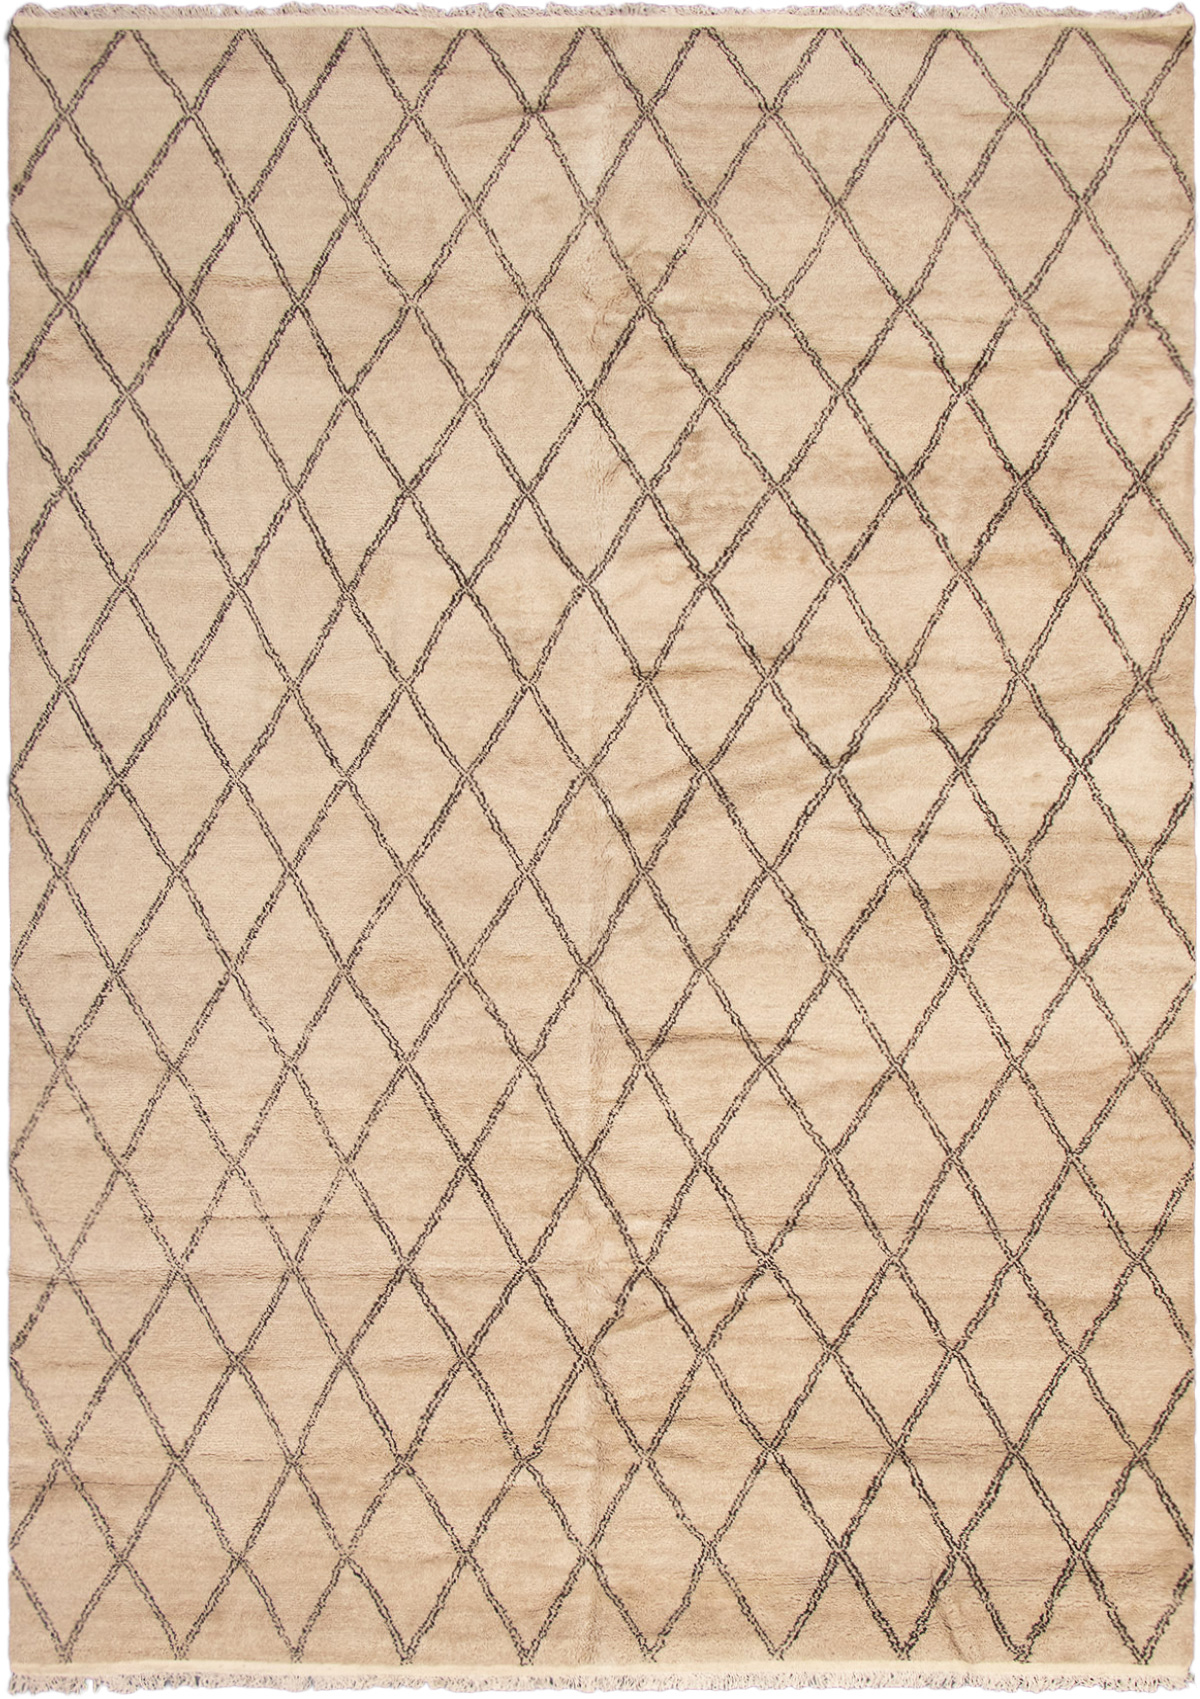 Hand-knotted Arlequin Cream Wool Rug 10'1" x 14'2" Size: 10'1" x 14'2"  